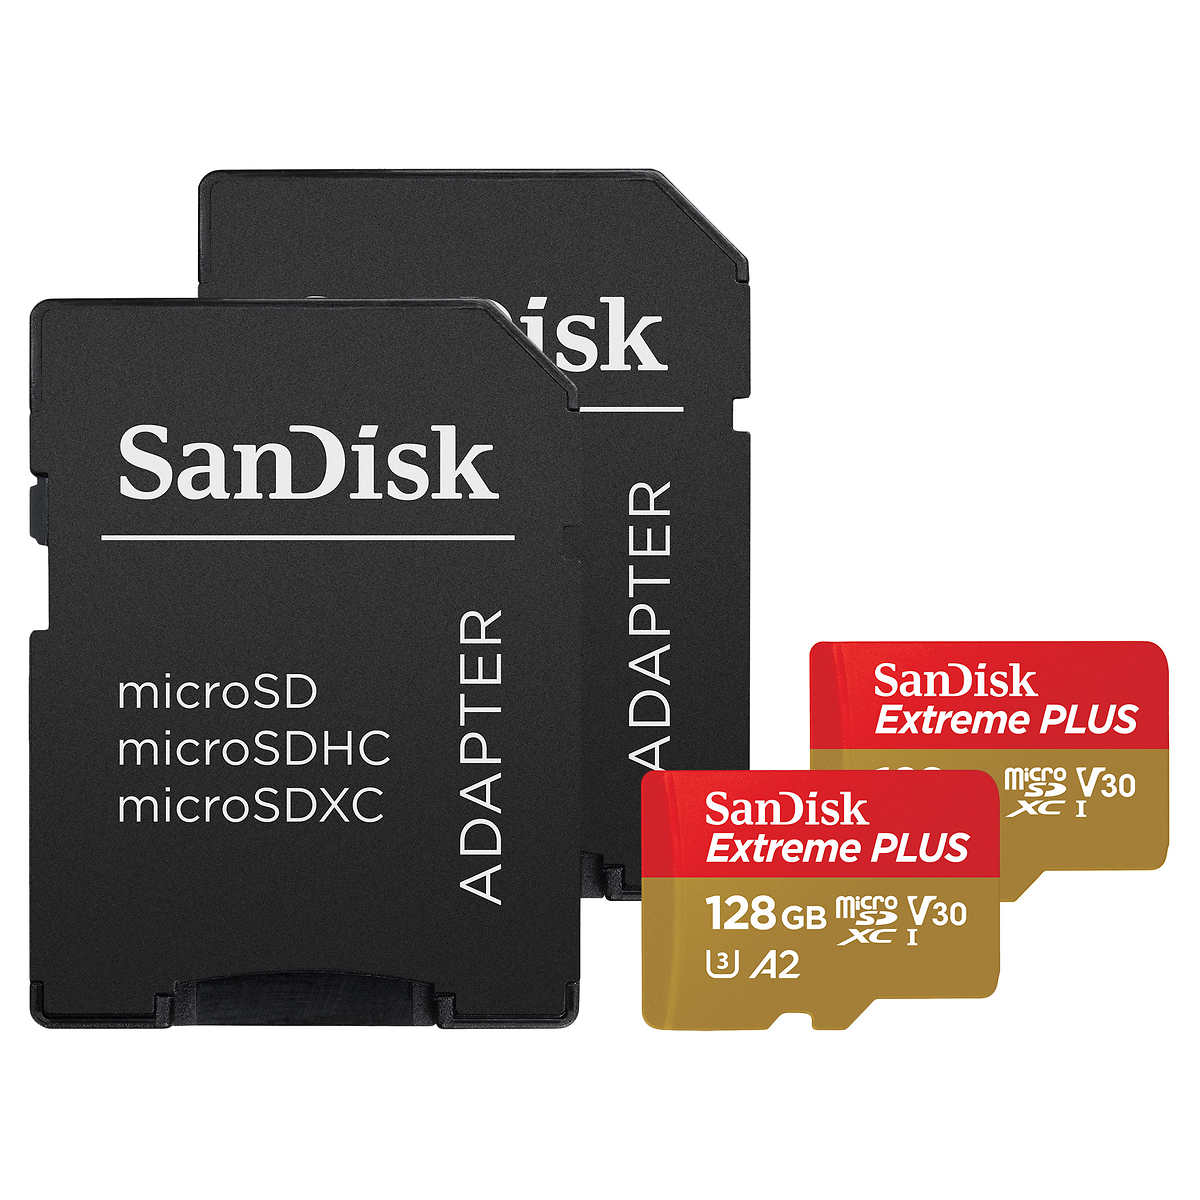 Sandisk Extreme Plus 128gb Microsd Card With Adapter 2 Pack Costco